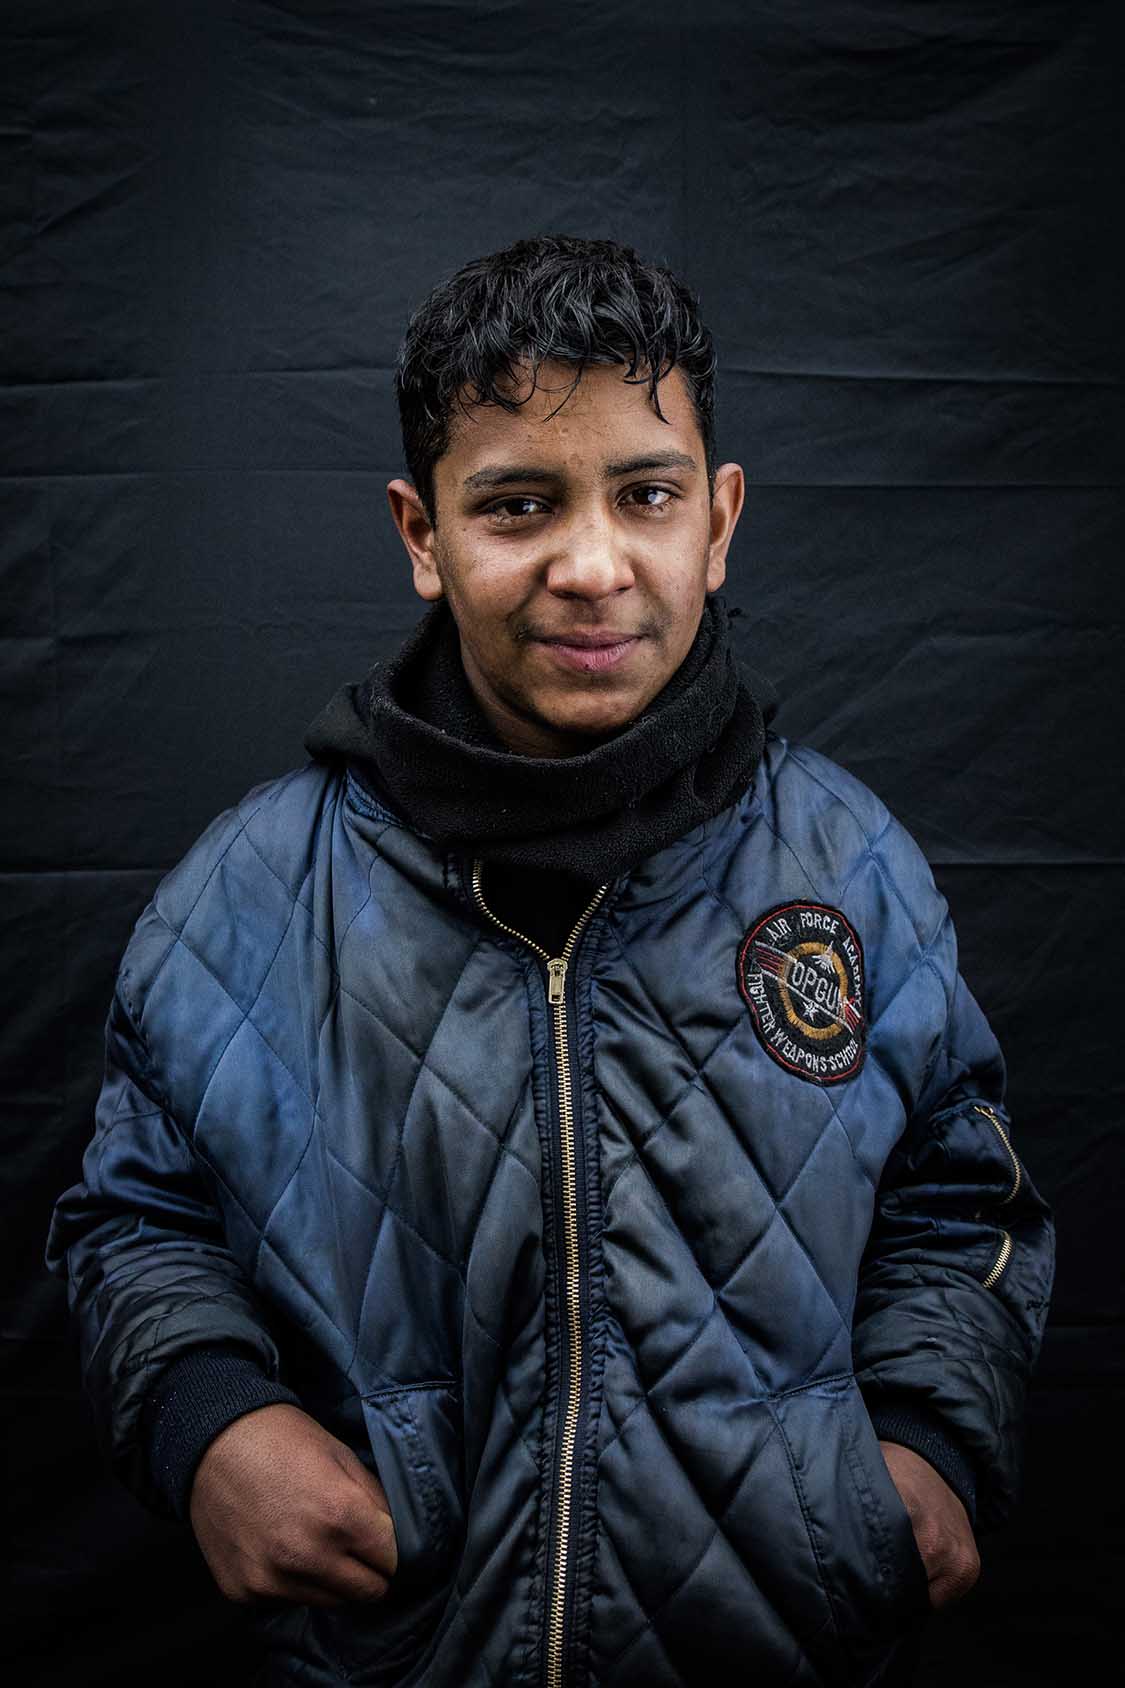  Ahmed, 13. Afghanistan.
"I am not afraid anymore. We walked six days in the forest to cross into Bulgaria. The police was after us. 
The smugglers were beating us as we were too slow." 